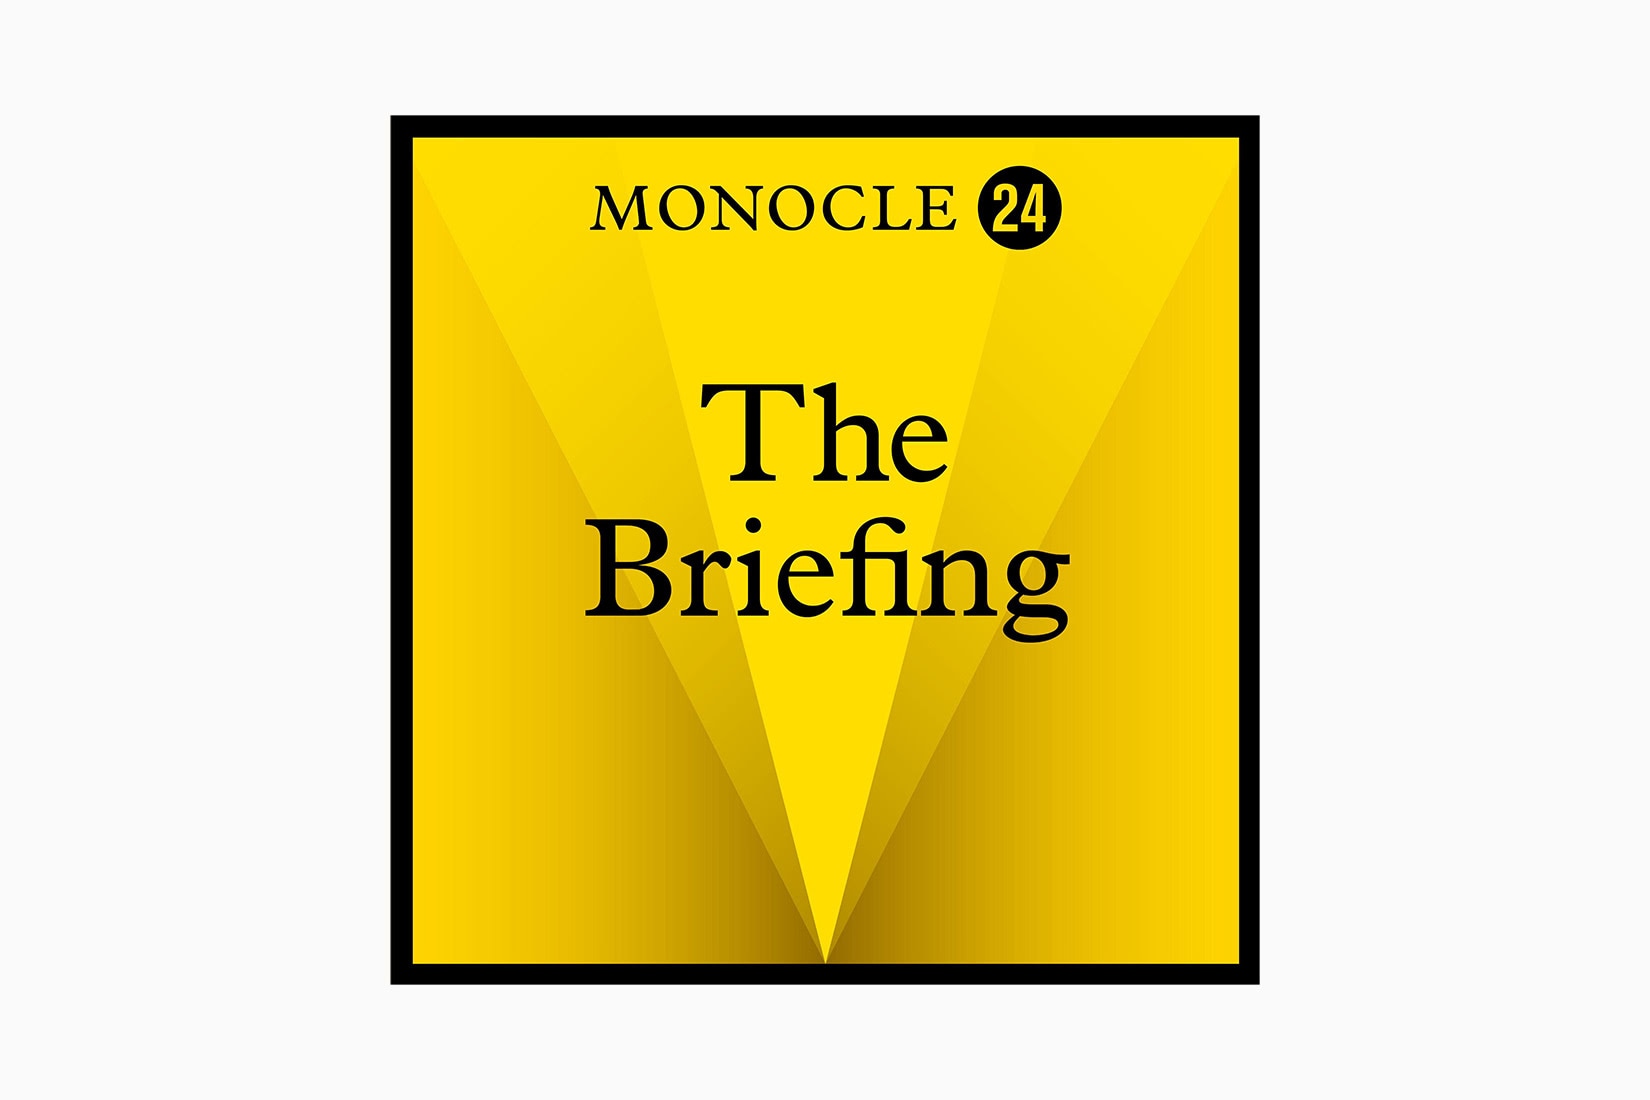 meilleurs podcasts le briefing monocle 24 luxe digital